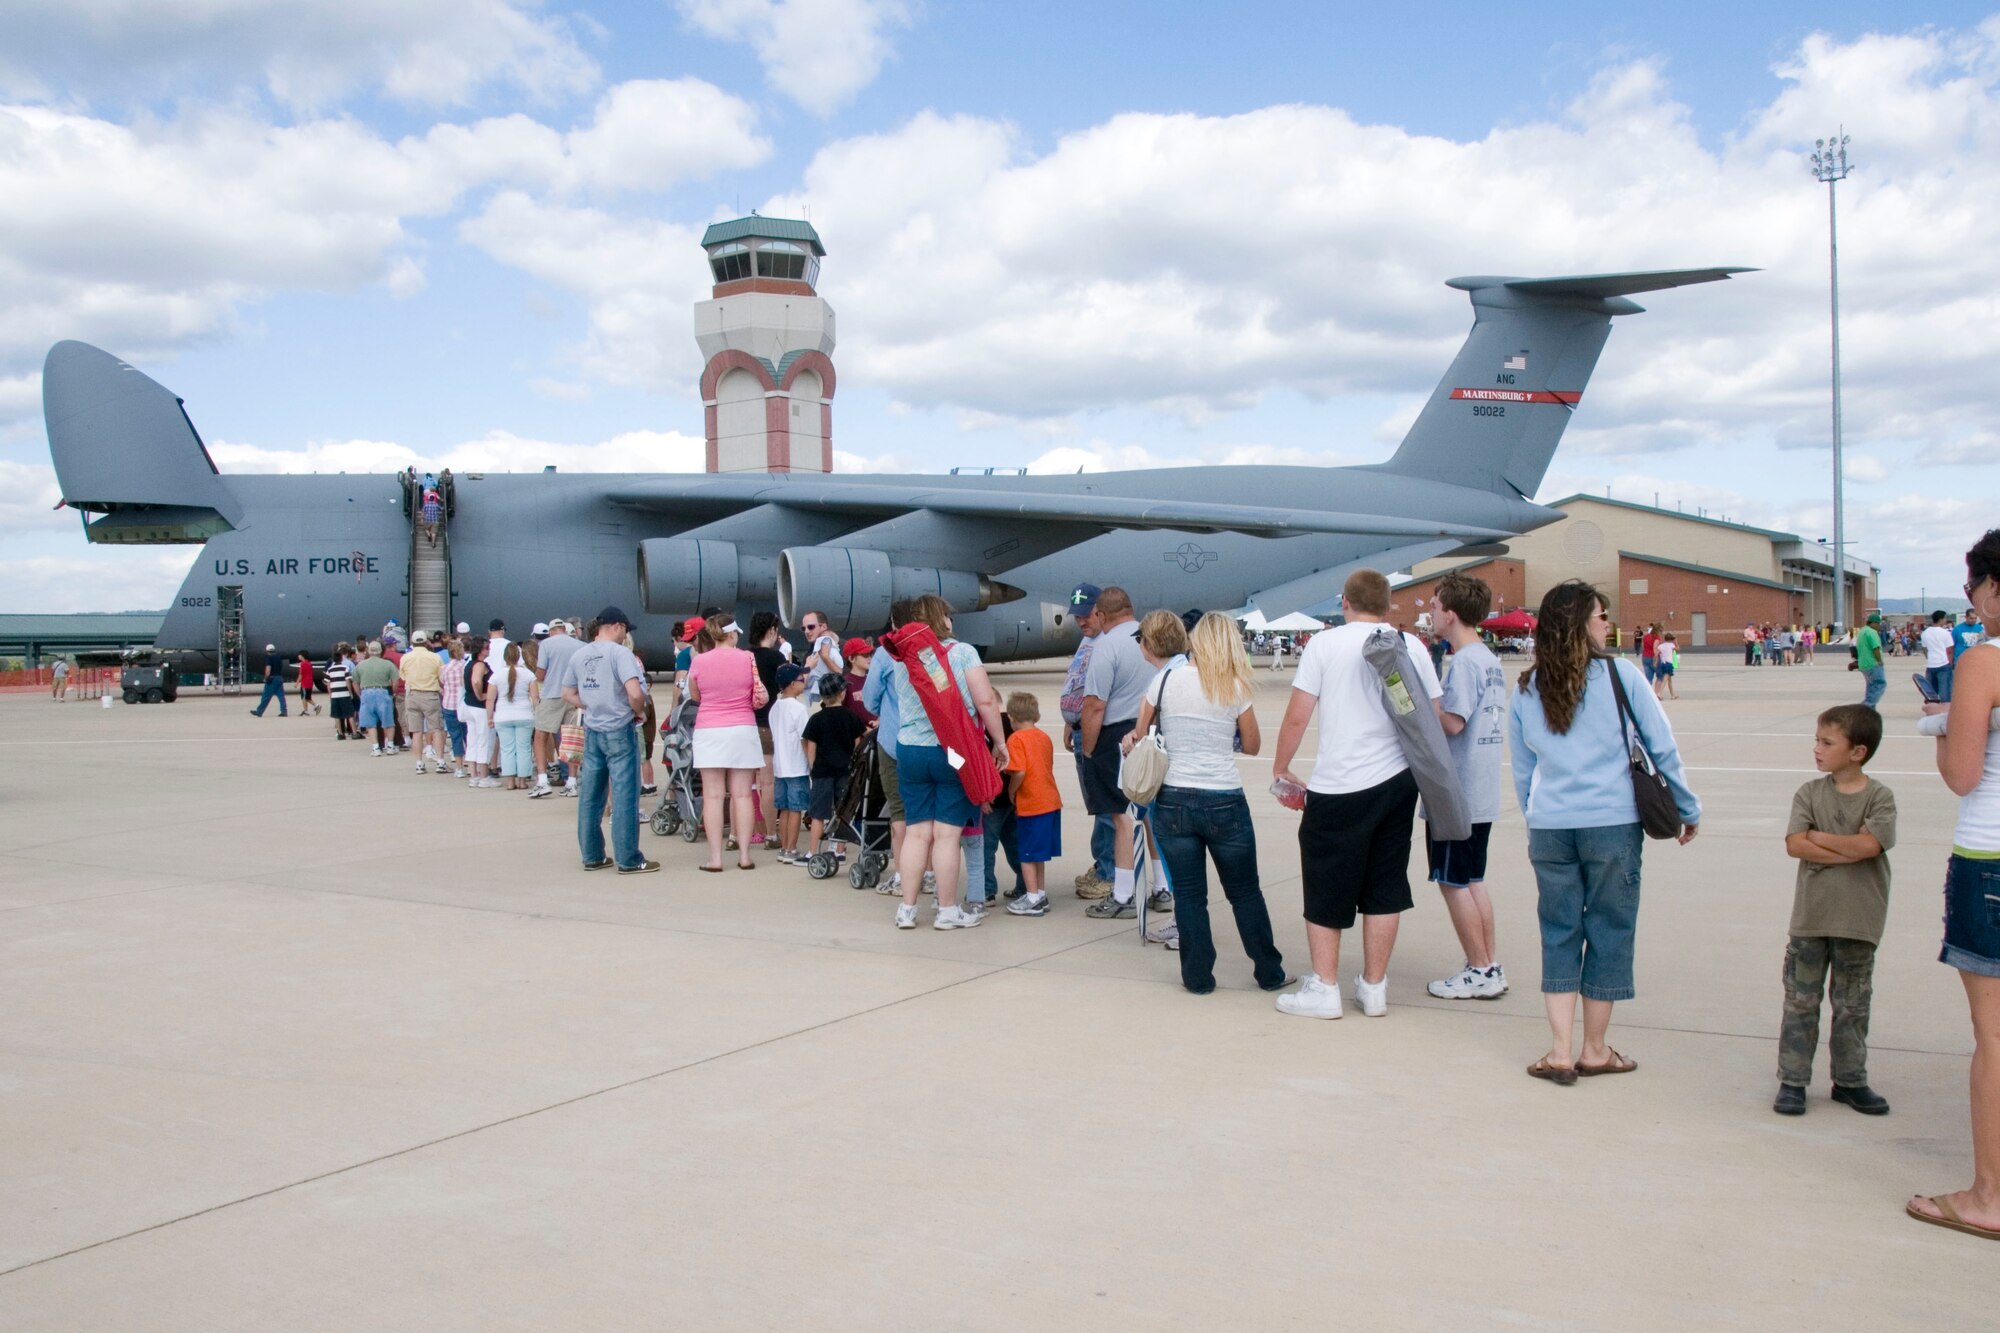 Air show spectators line up to get a look inside the C-5 Galaxy aircraft on display at the 167th Airlift Wings Open House. The 167th Airlift Wing, West Virginia Air National Guard unit in Martinsburg, WV held an open house in conjuction with the Thunder Over the Blue Ridge Air Show on September 4 and 5, 2010. The U.S. Air Force Thunderbirds and the U.S. Army Golden Knights headlined the show. (U.S. Air Force photo by MSgt Emily Beightol-Deyerle)